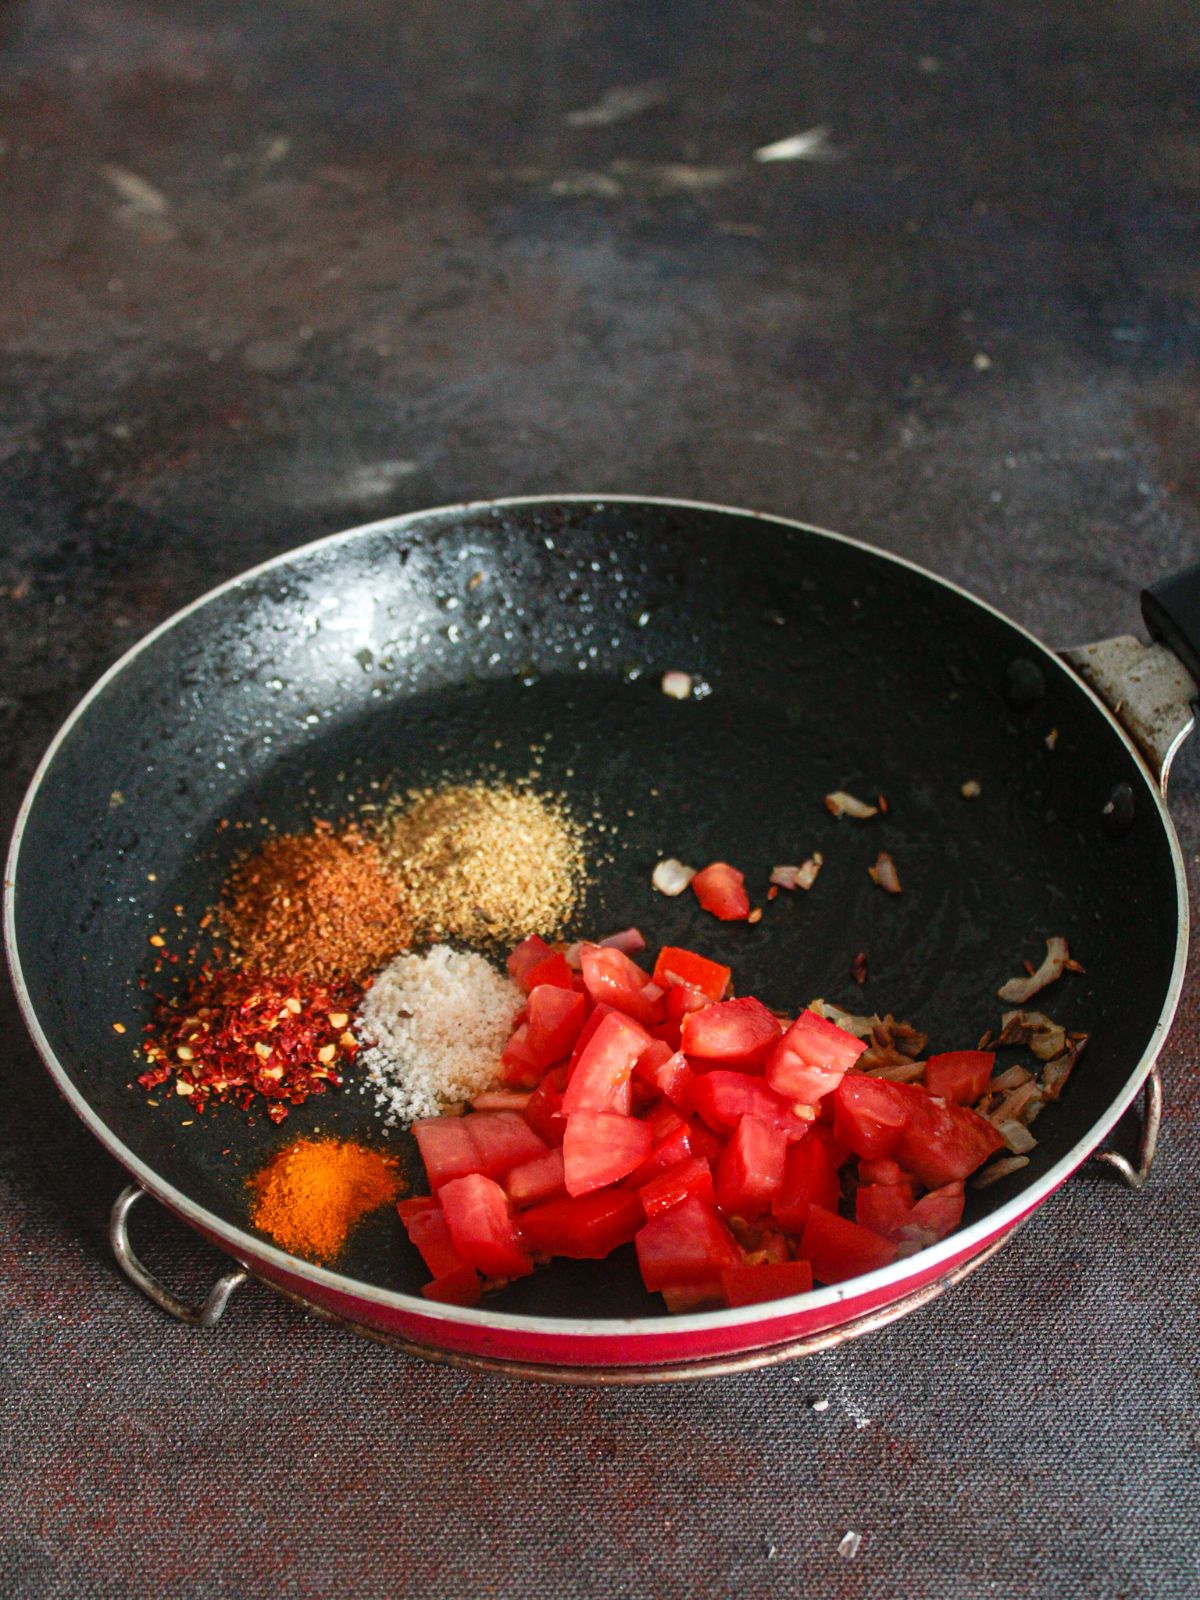 Tomatoes and spices in skillet